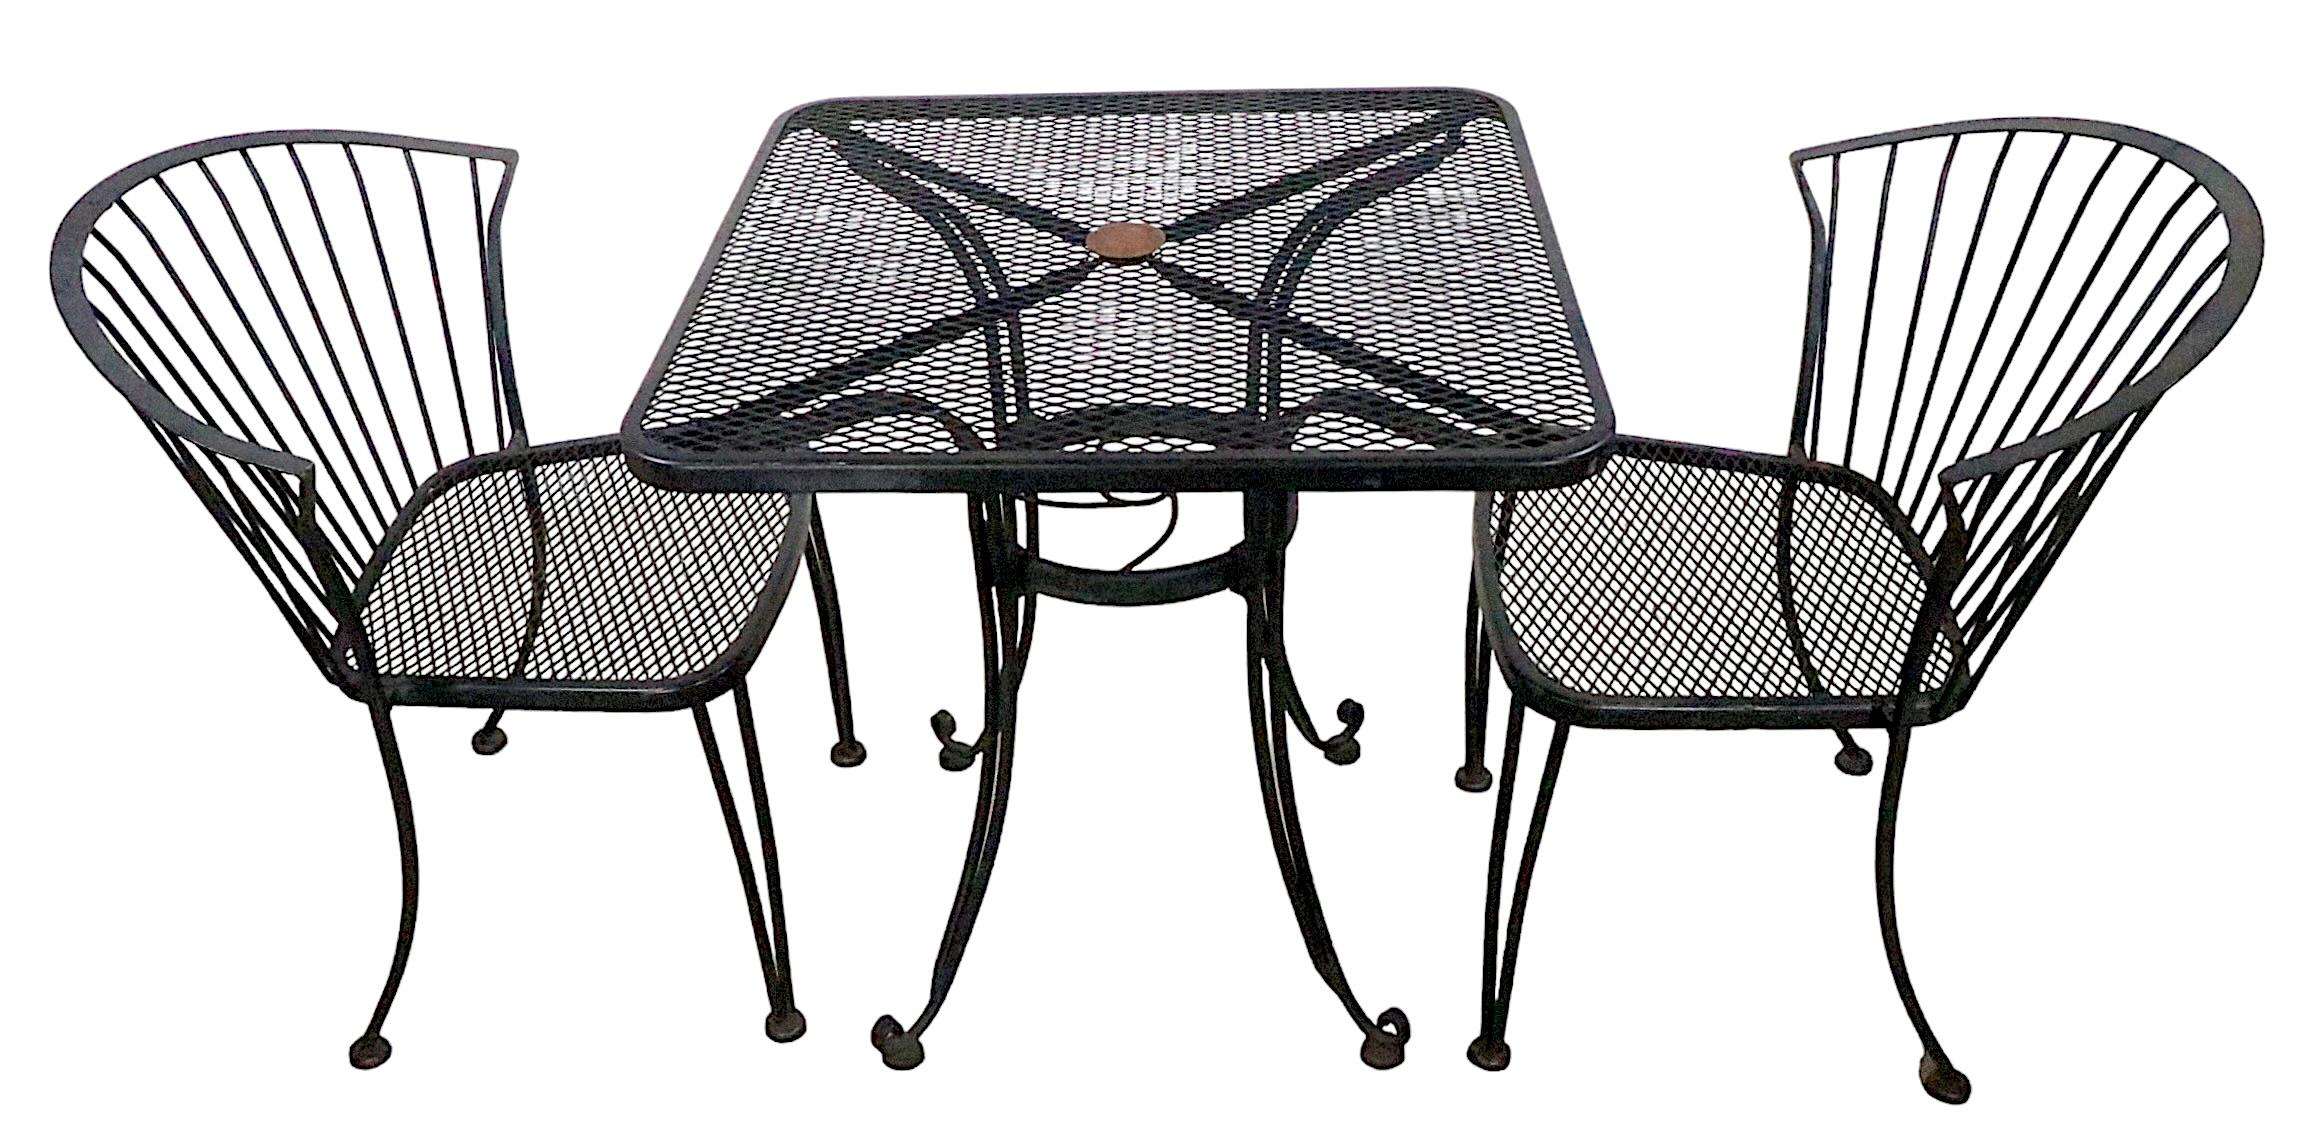  Vintage  3 pc. Metal  Cafe Bistro Set by Carolina Forge Table with Two Chairs For Sale 1